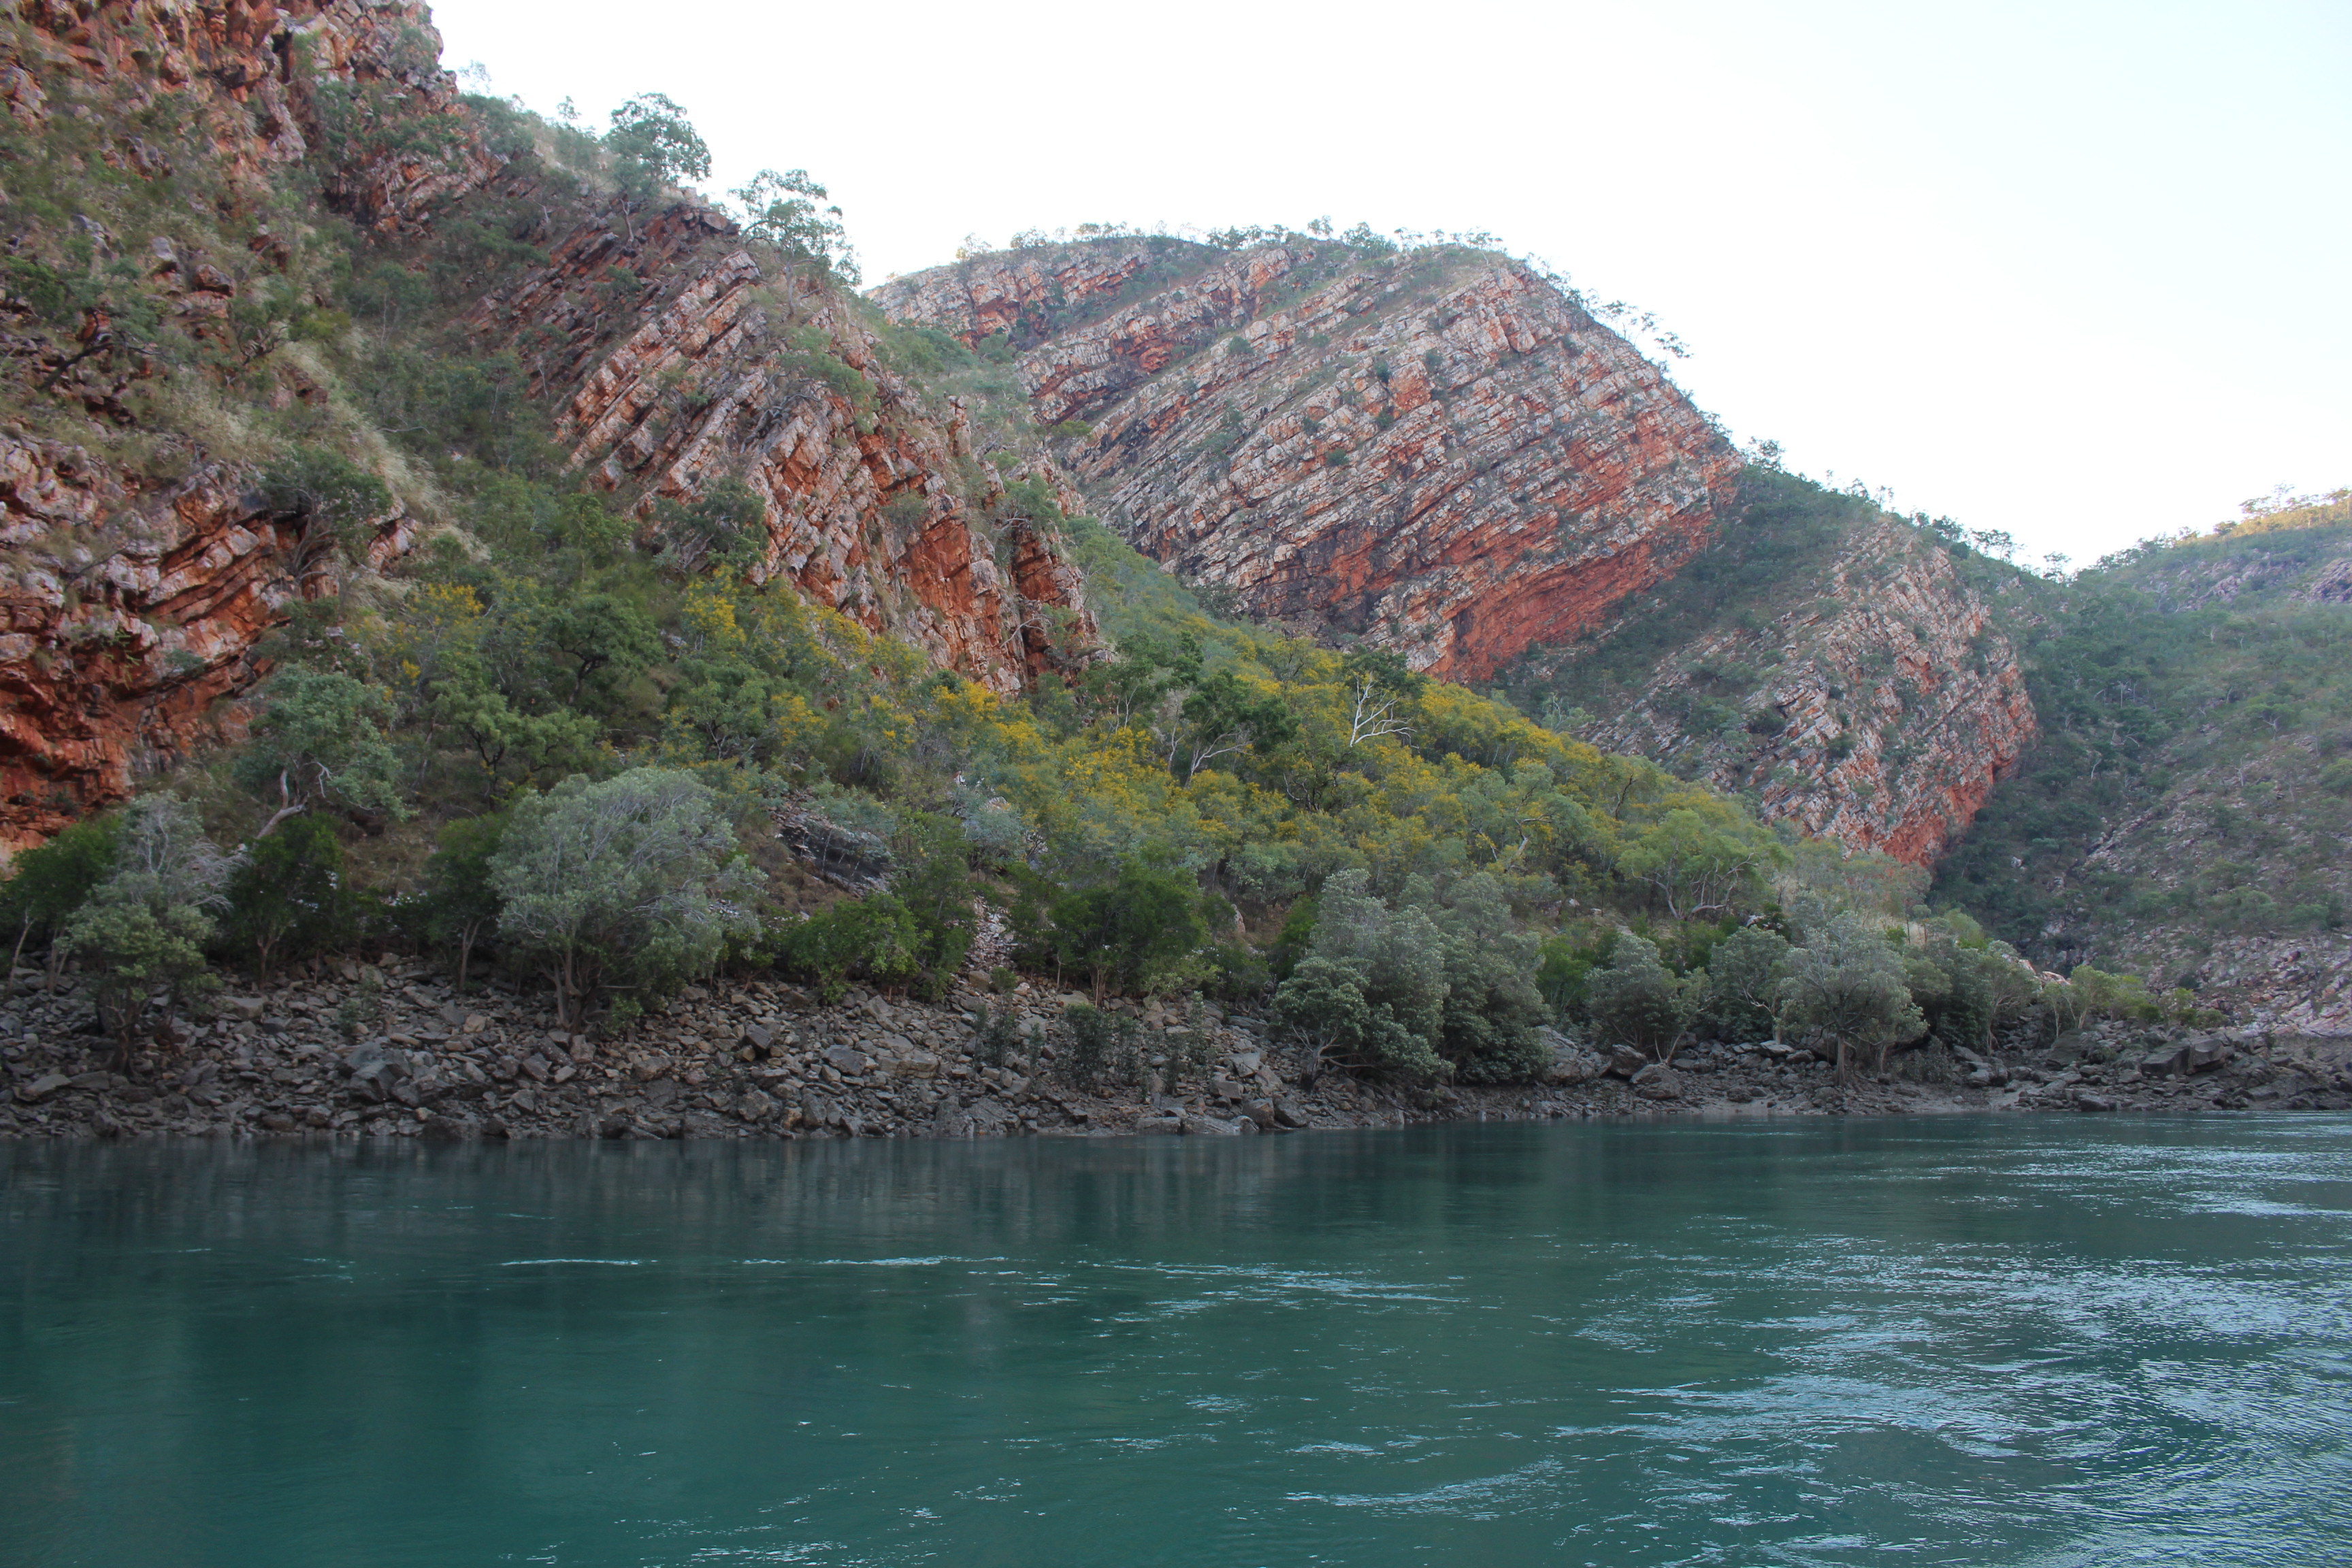 Horizontal Falls Seaplane Adventures: Review of Derby Overnight Tour.